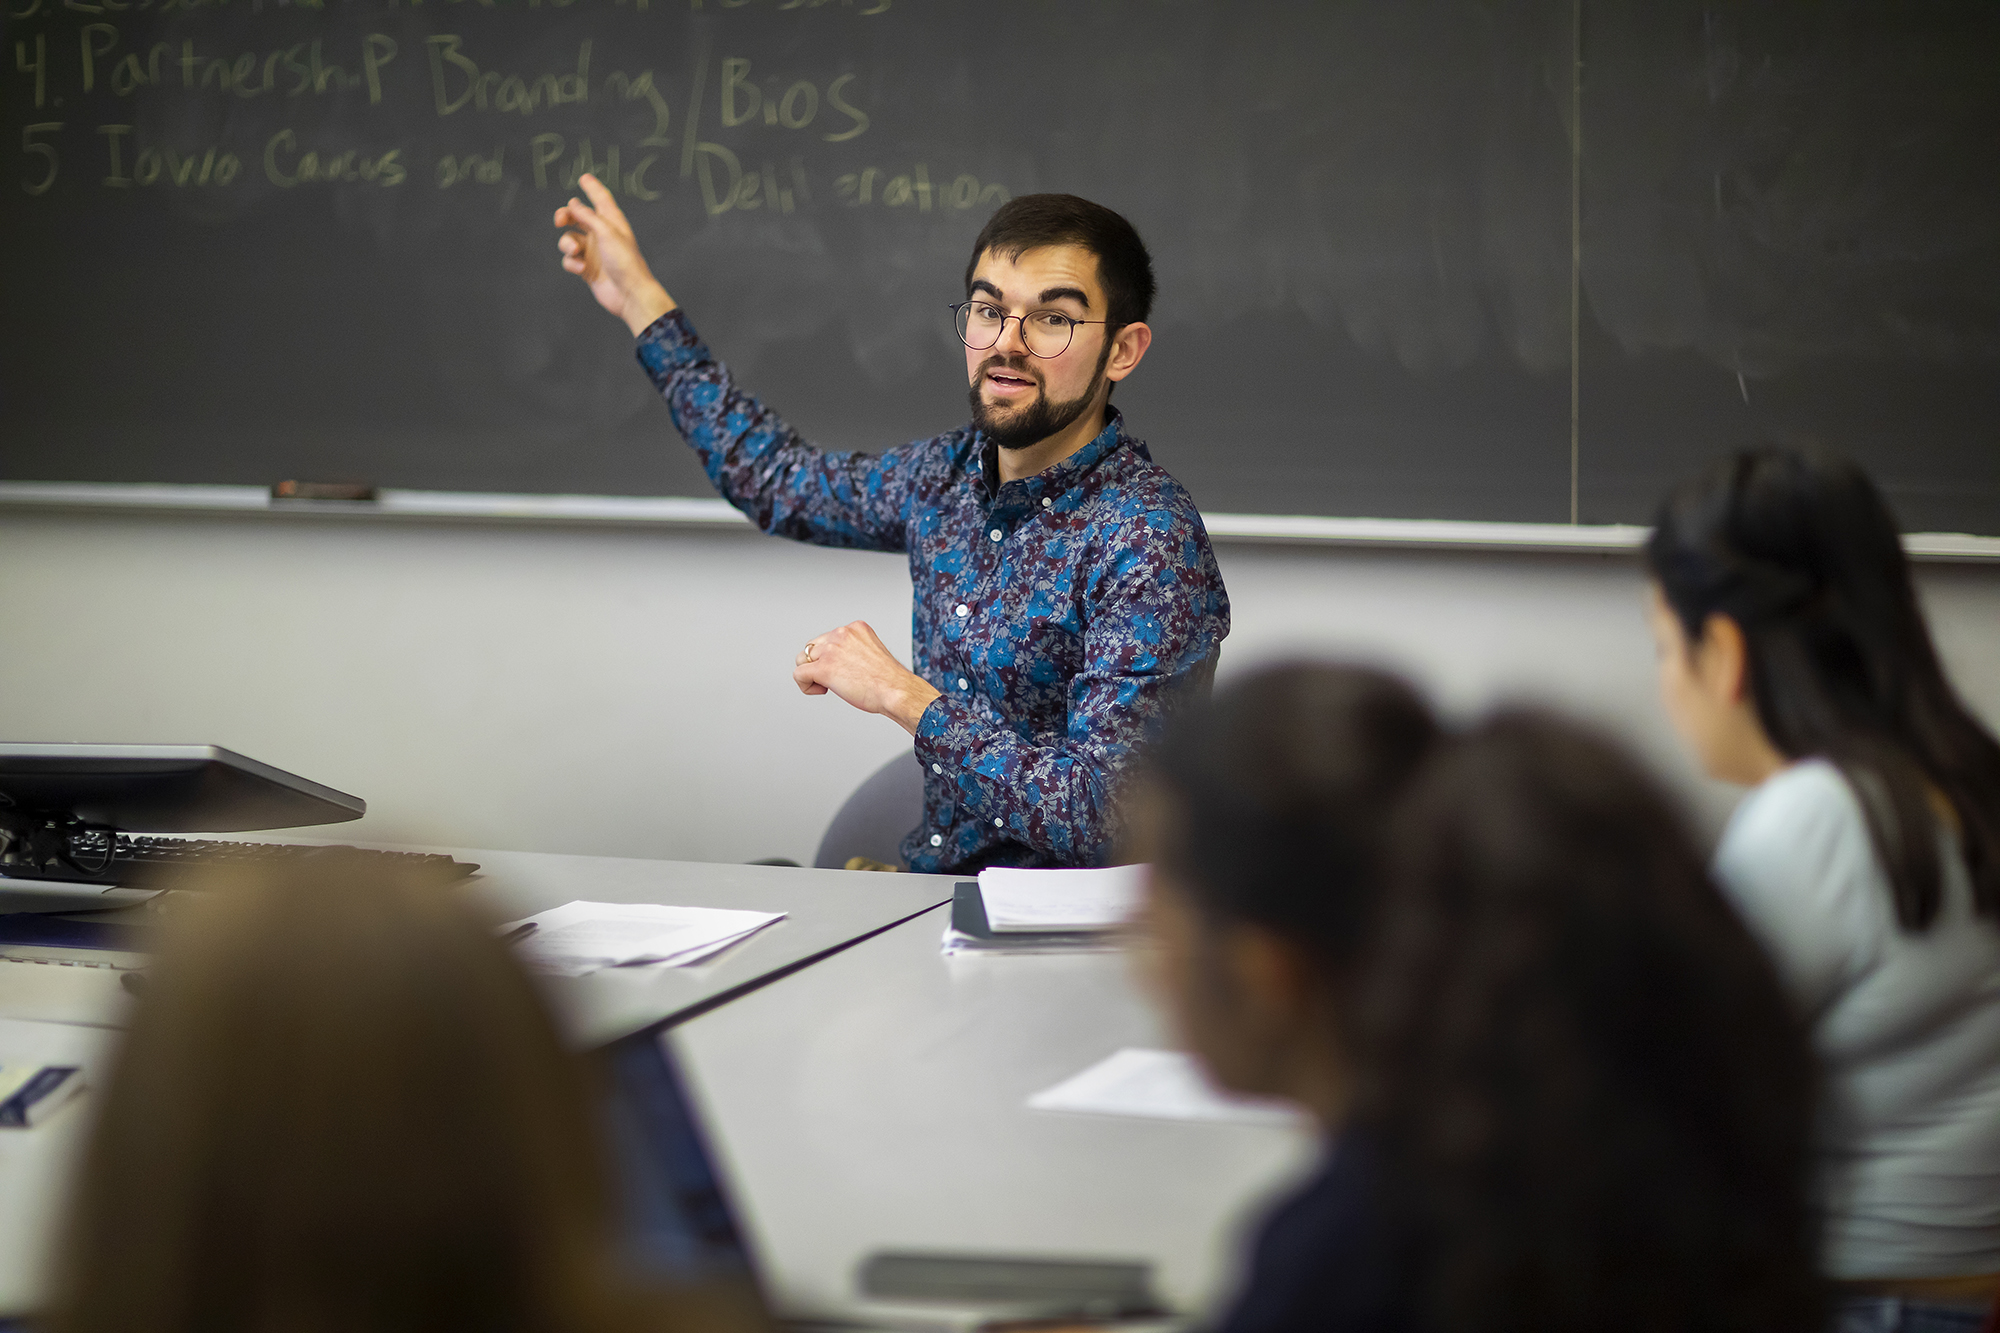 Man in flowered shirt points at a blackboard where class assignments are written